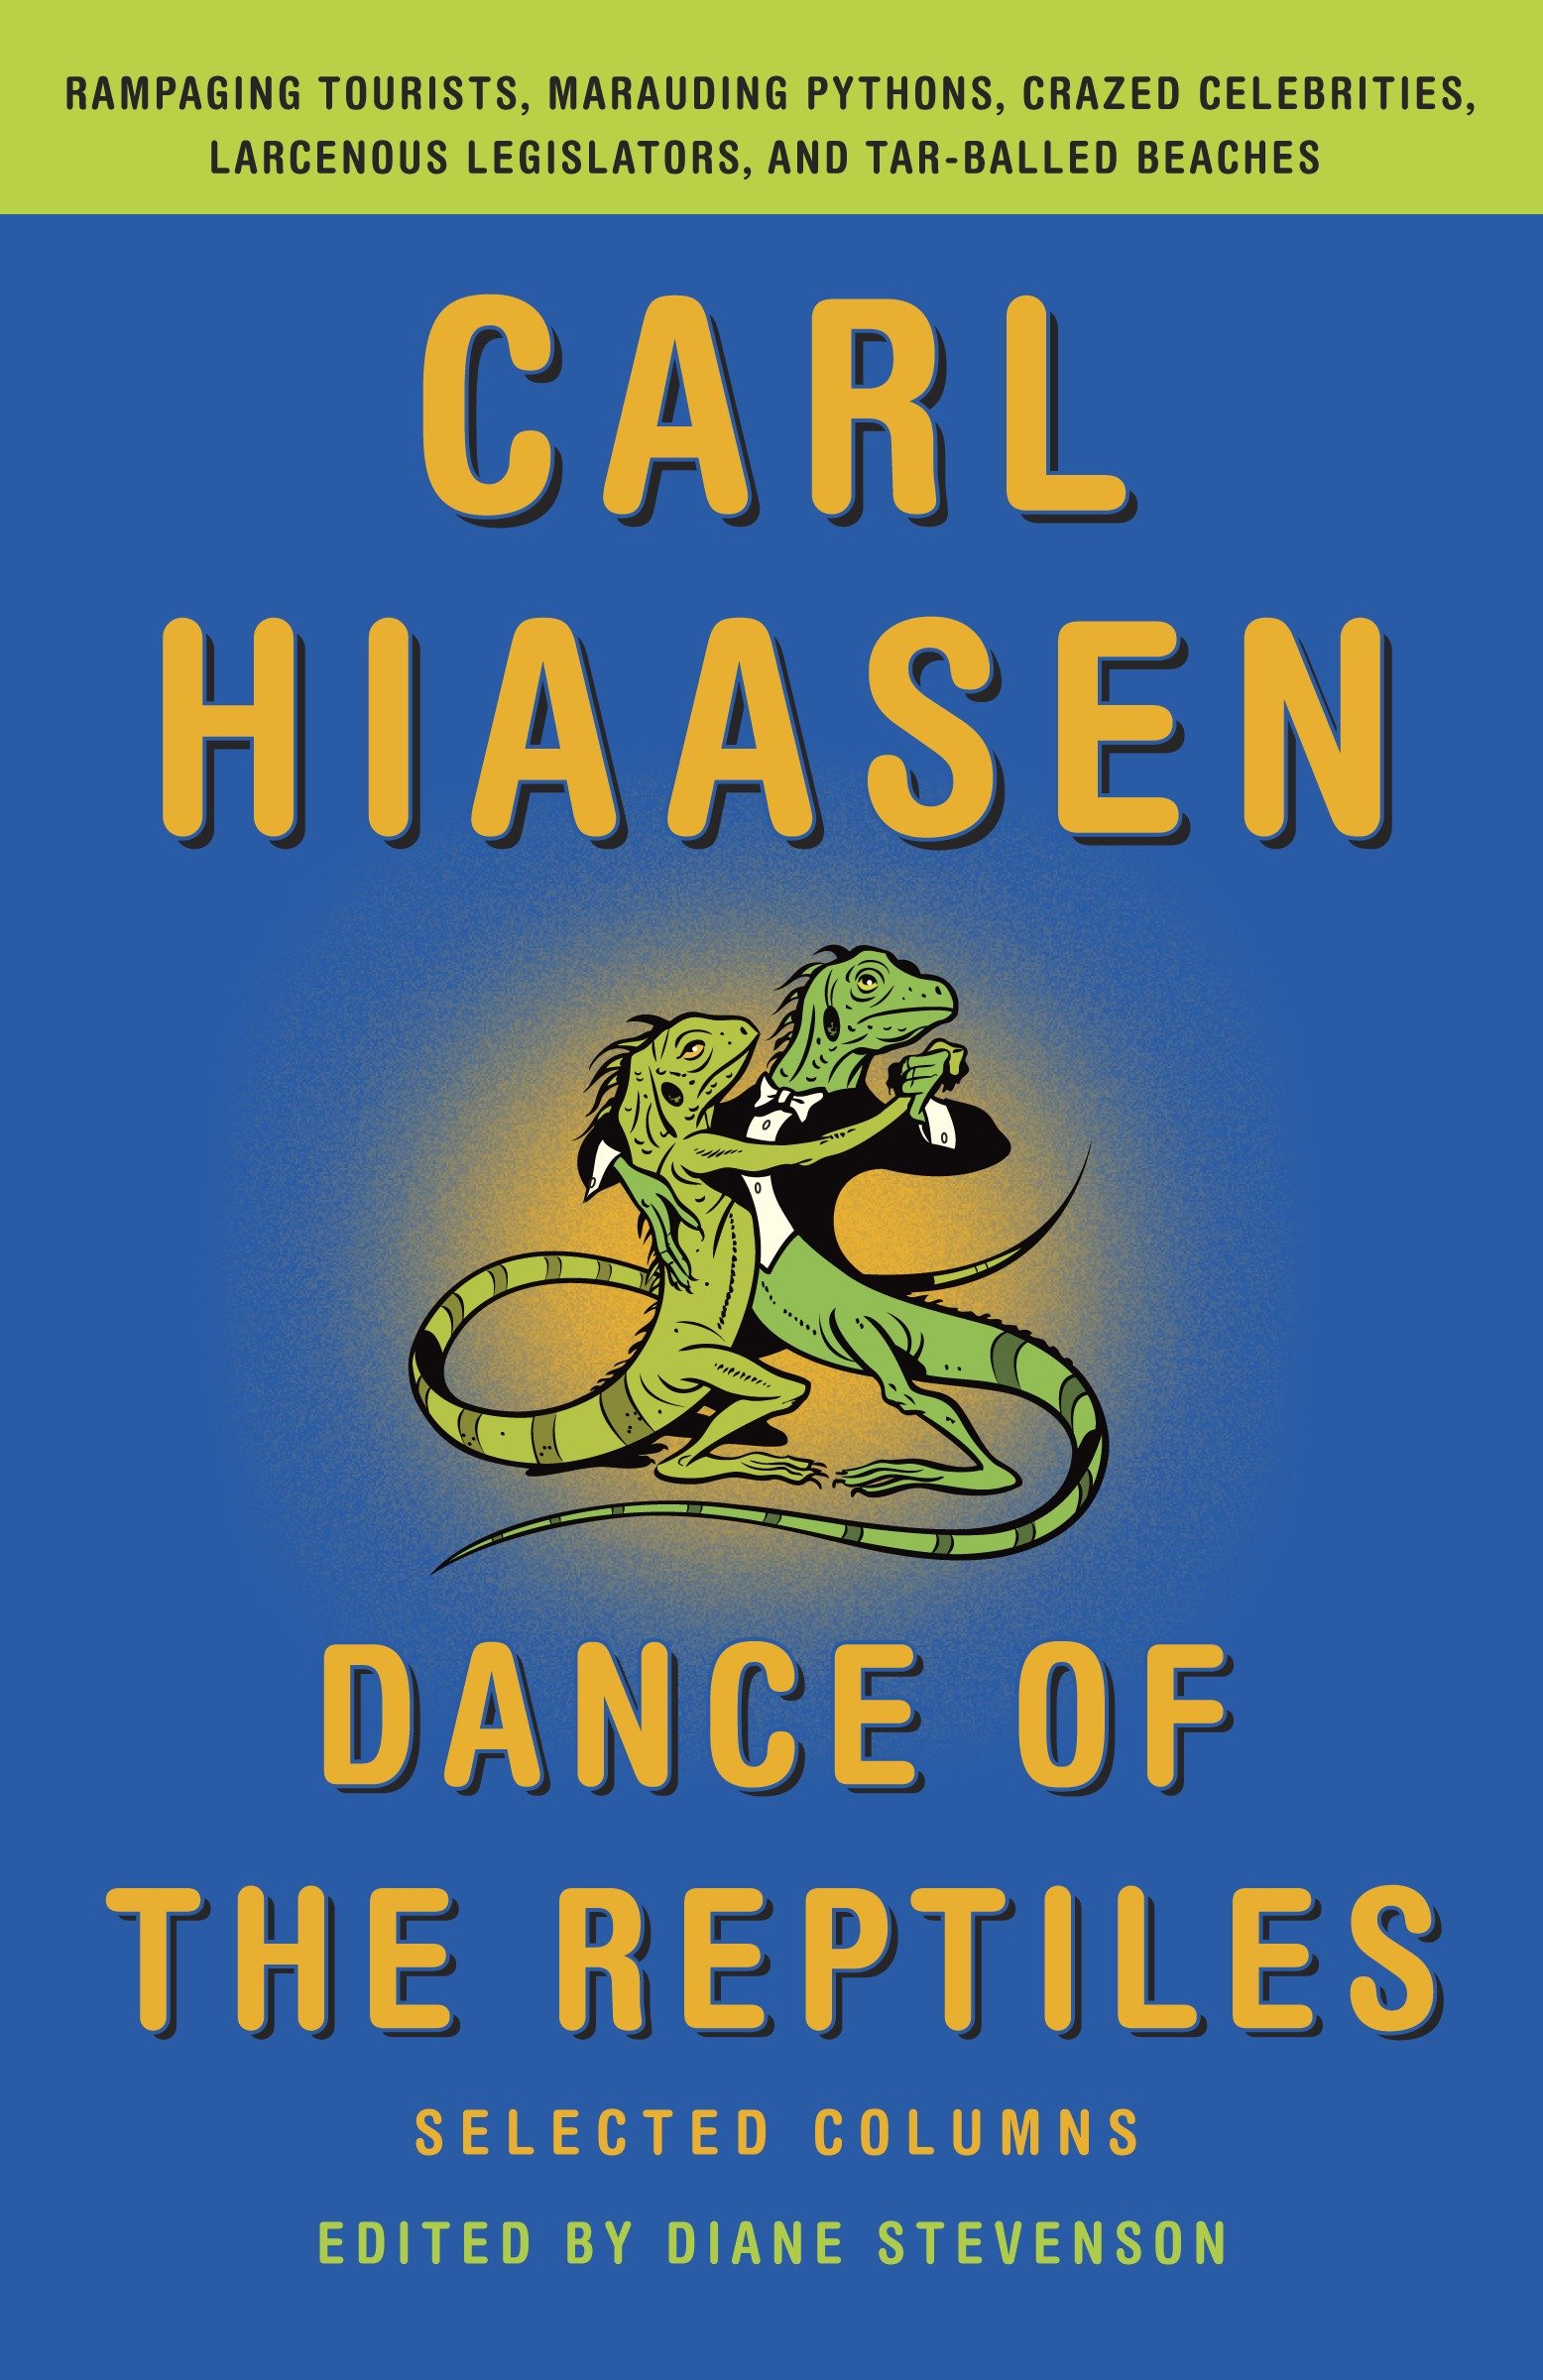 Umschlagbild für Dance of the Reptiles [electronic resource] : Rampaging Tourists, Marauding Pythons, Larcenous Legislators, Crazed Celebrities, and Tar-Balled Beaches: Selected Columns